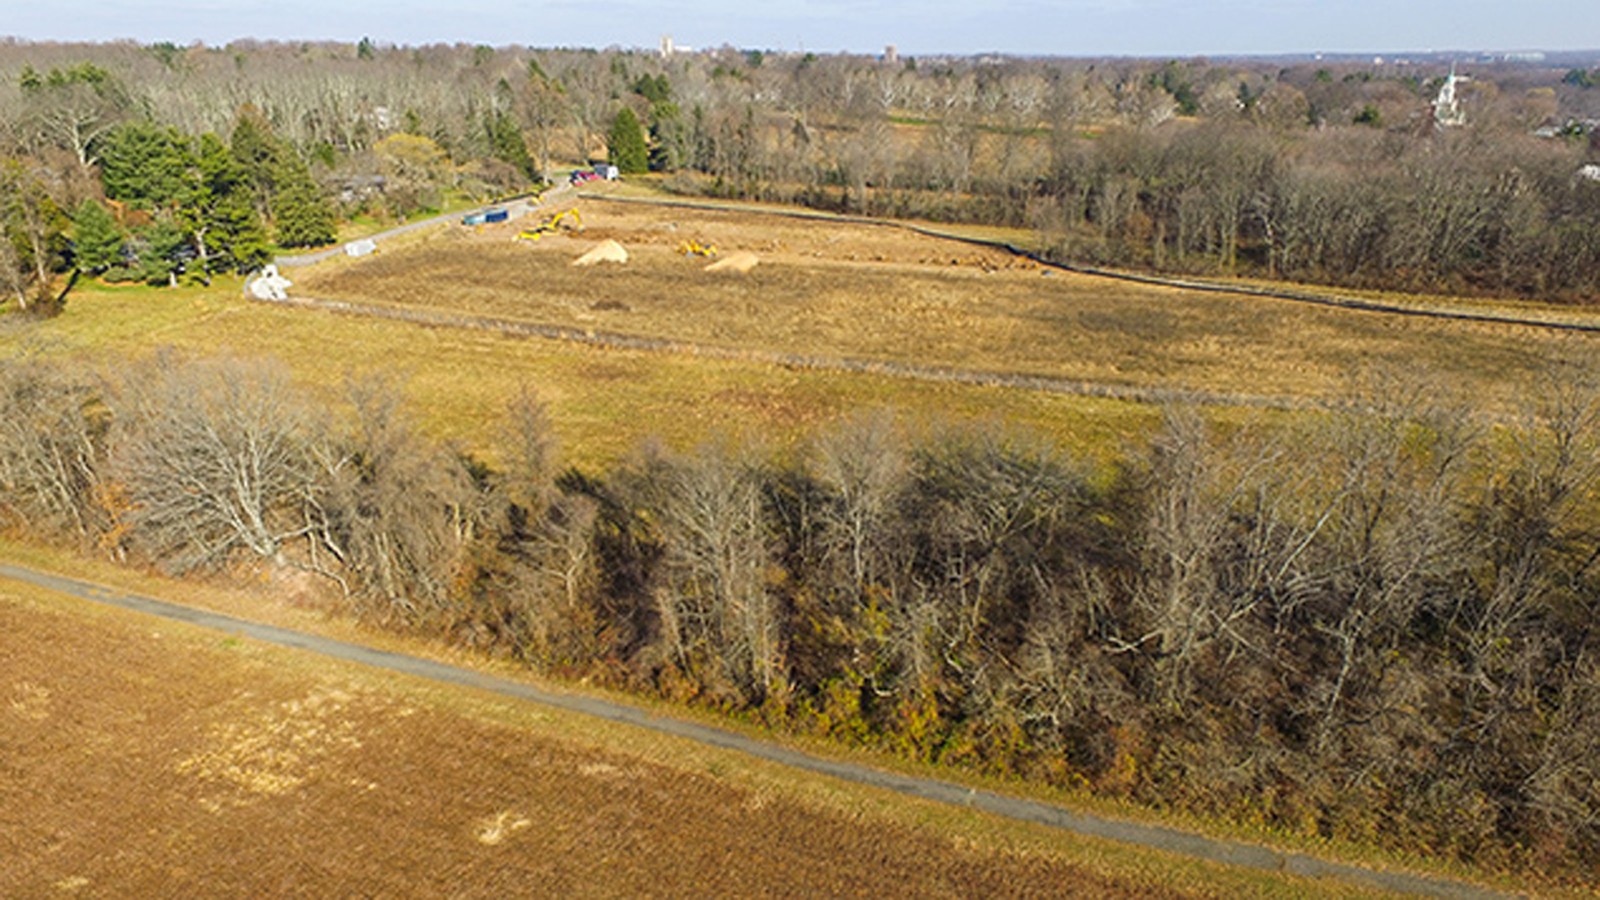 Aerial view of Maxwell’s Field at the Princeton Battlefield